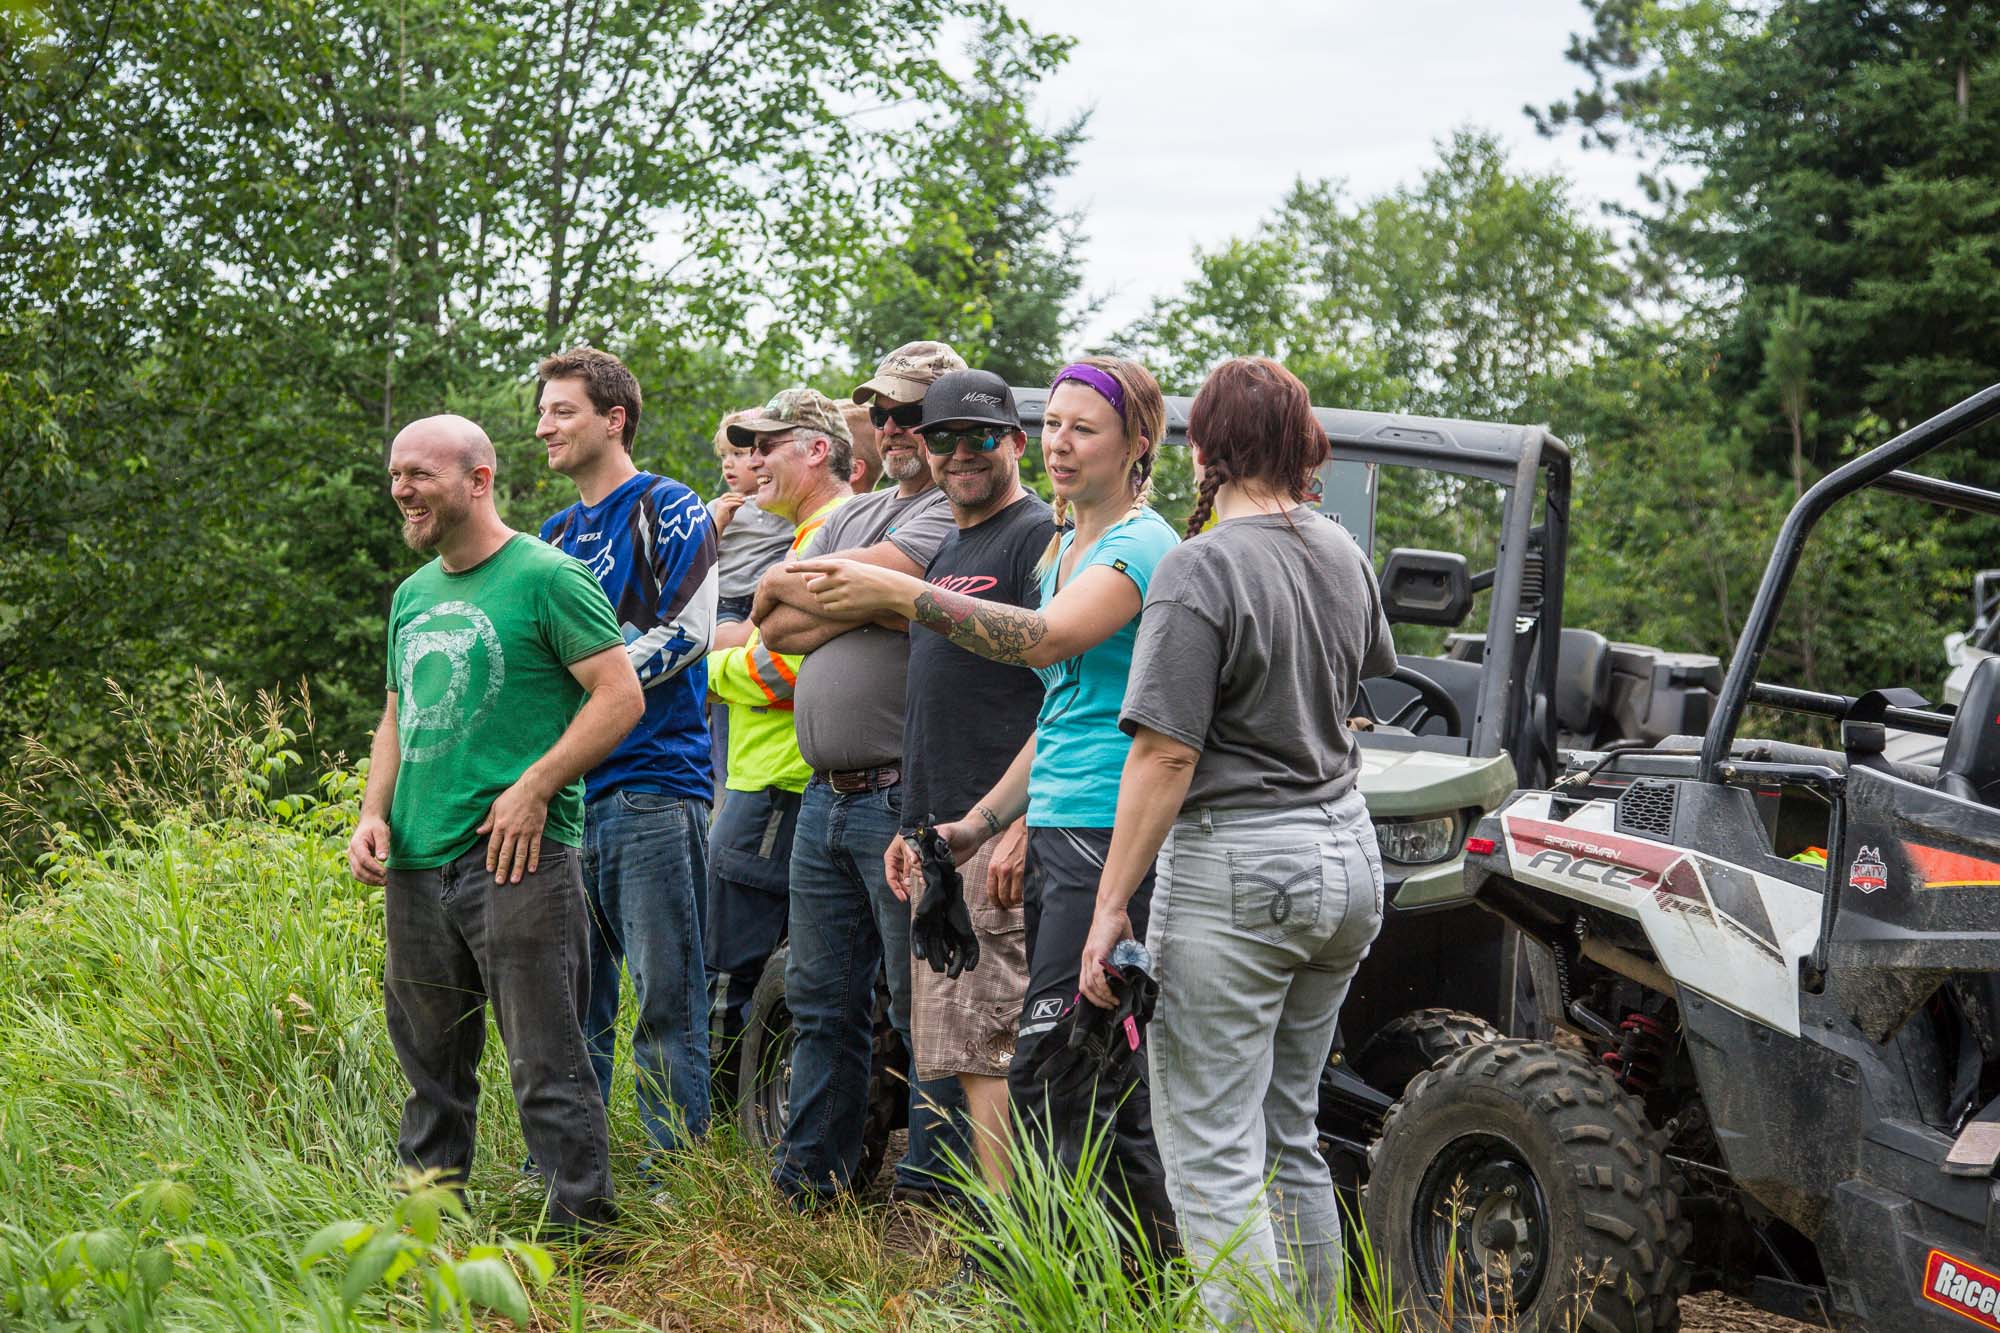 a group of smiling people laughing and talking about something out of the frame; one woman is pointing her finger as she speaks. They are standing in a forest next to their ATVs and UTVs.